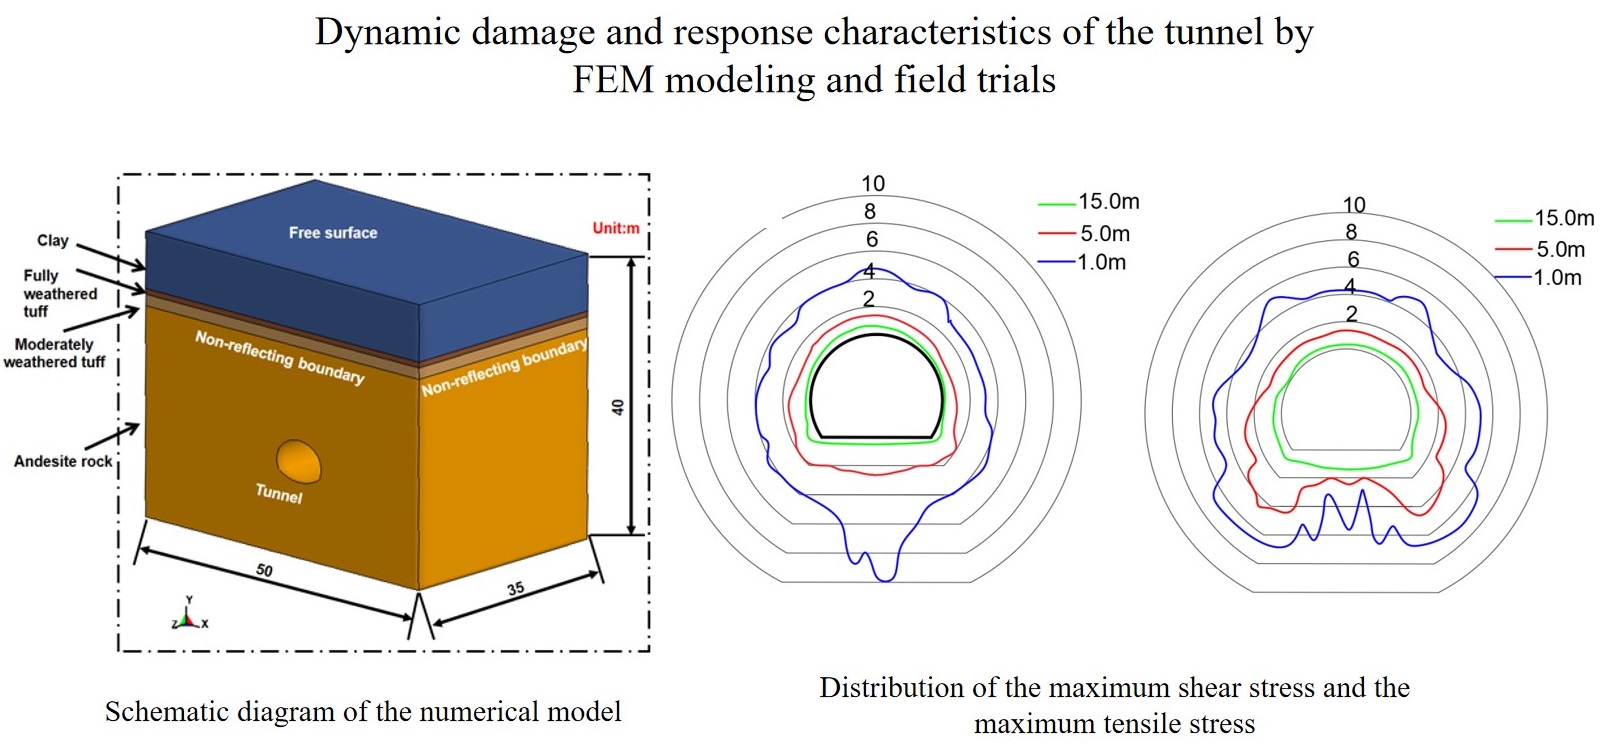 Dynamic damage and response characteristics of the tunnel by FEM modeling and field trials